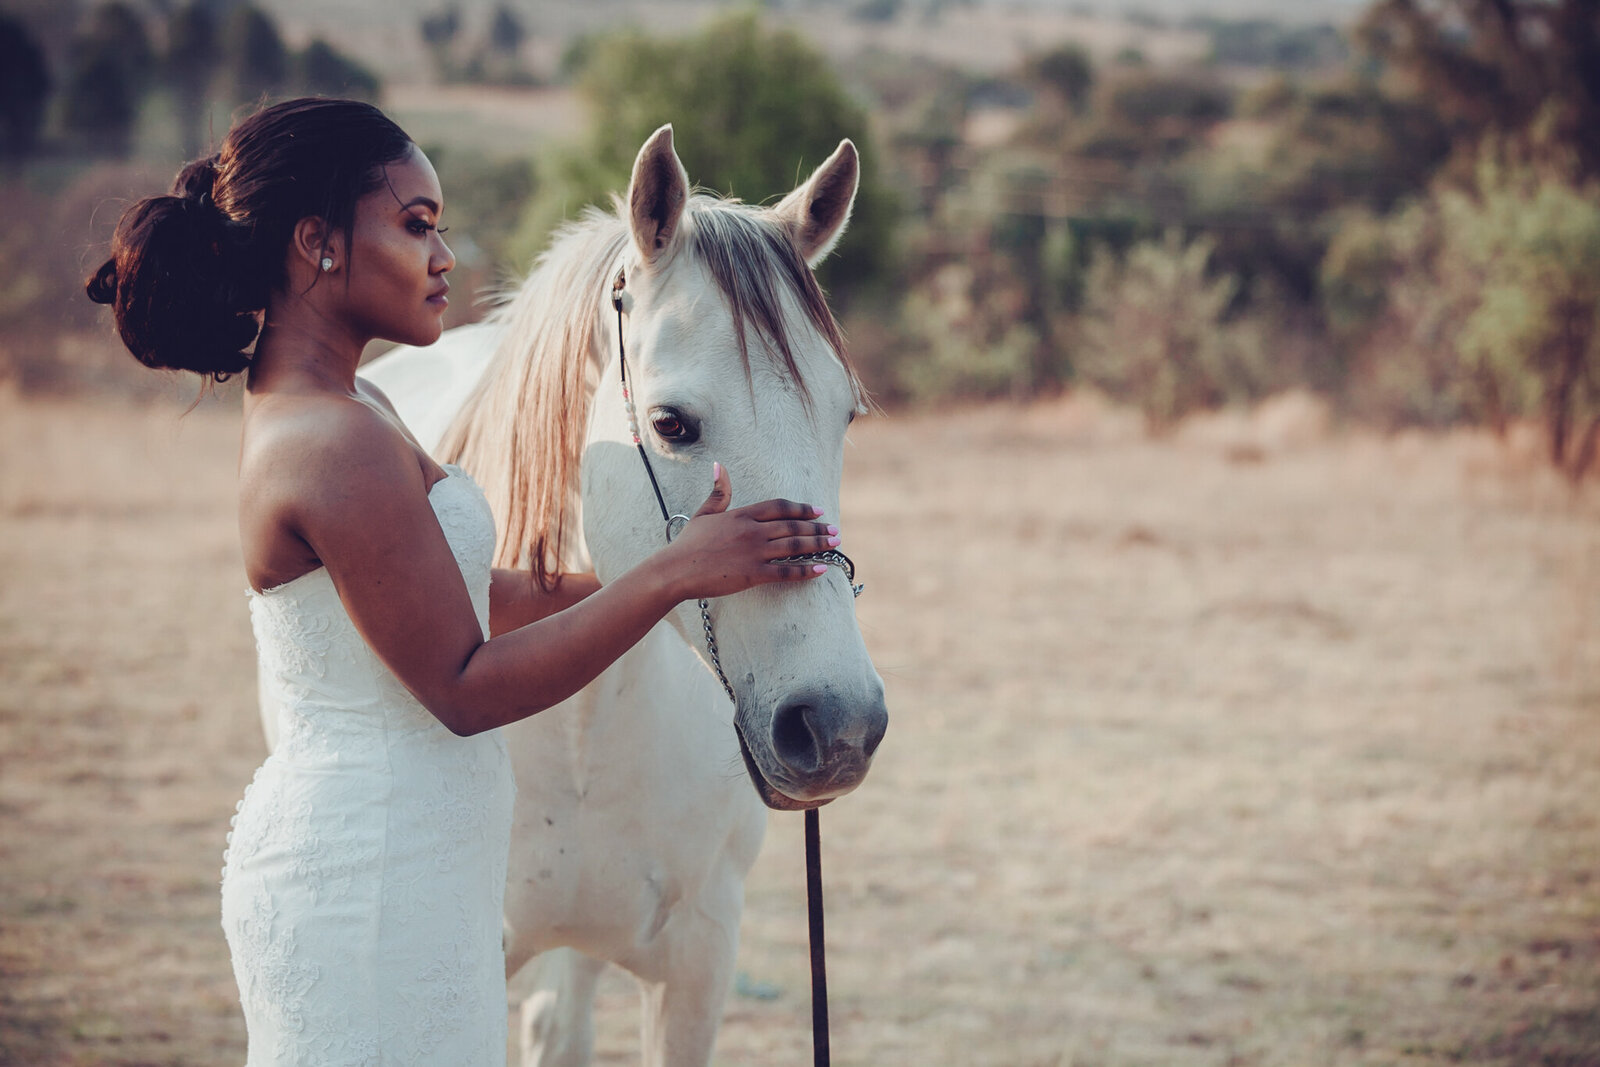 Bridal portraits with the horses at Cradle Valley in Muldersdrift